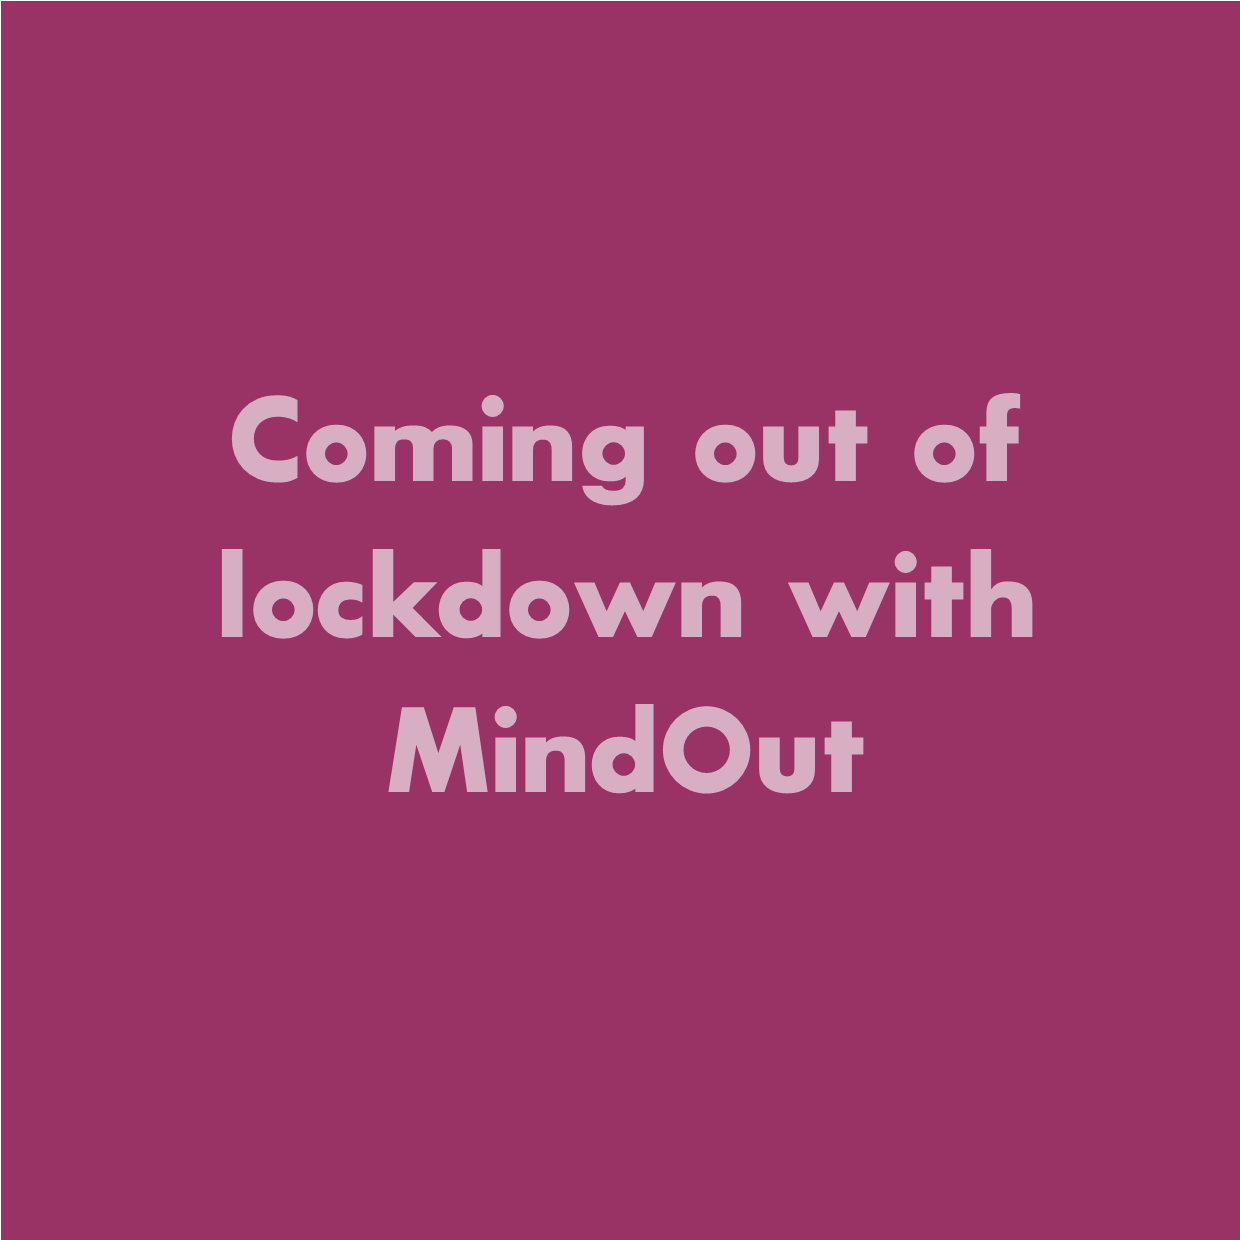 The words 'Coming out of lockdown with MindOut' on a purple background